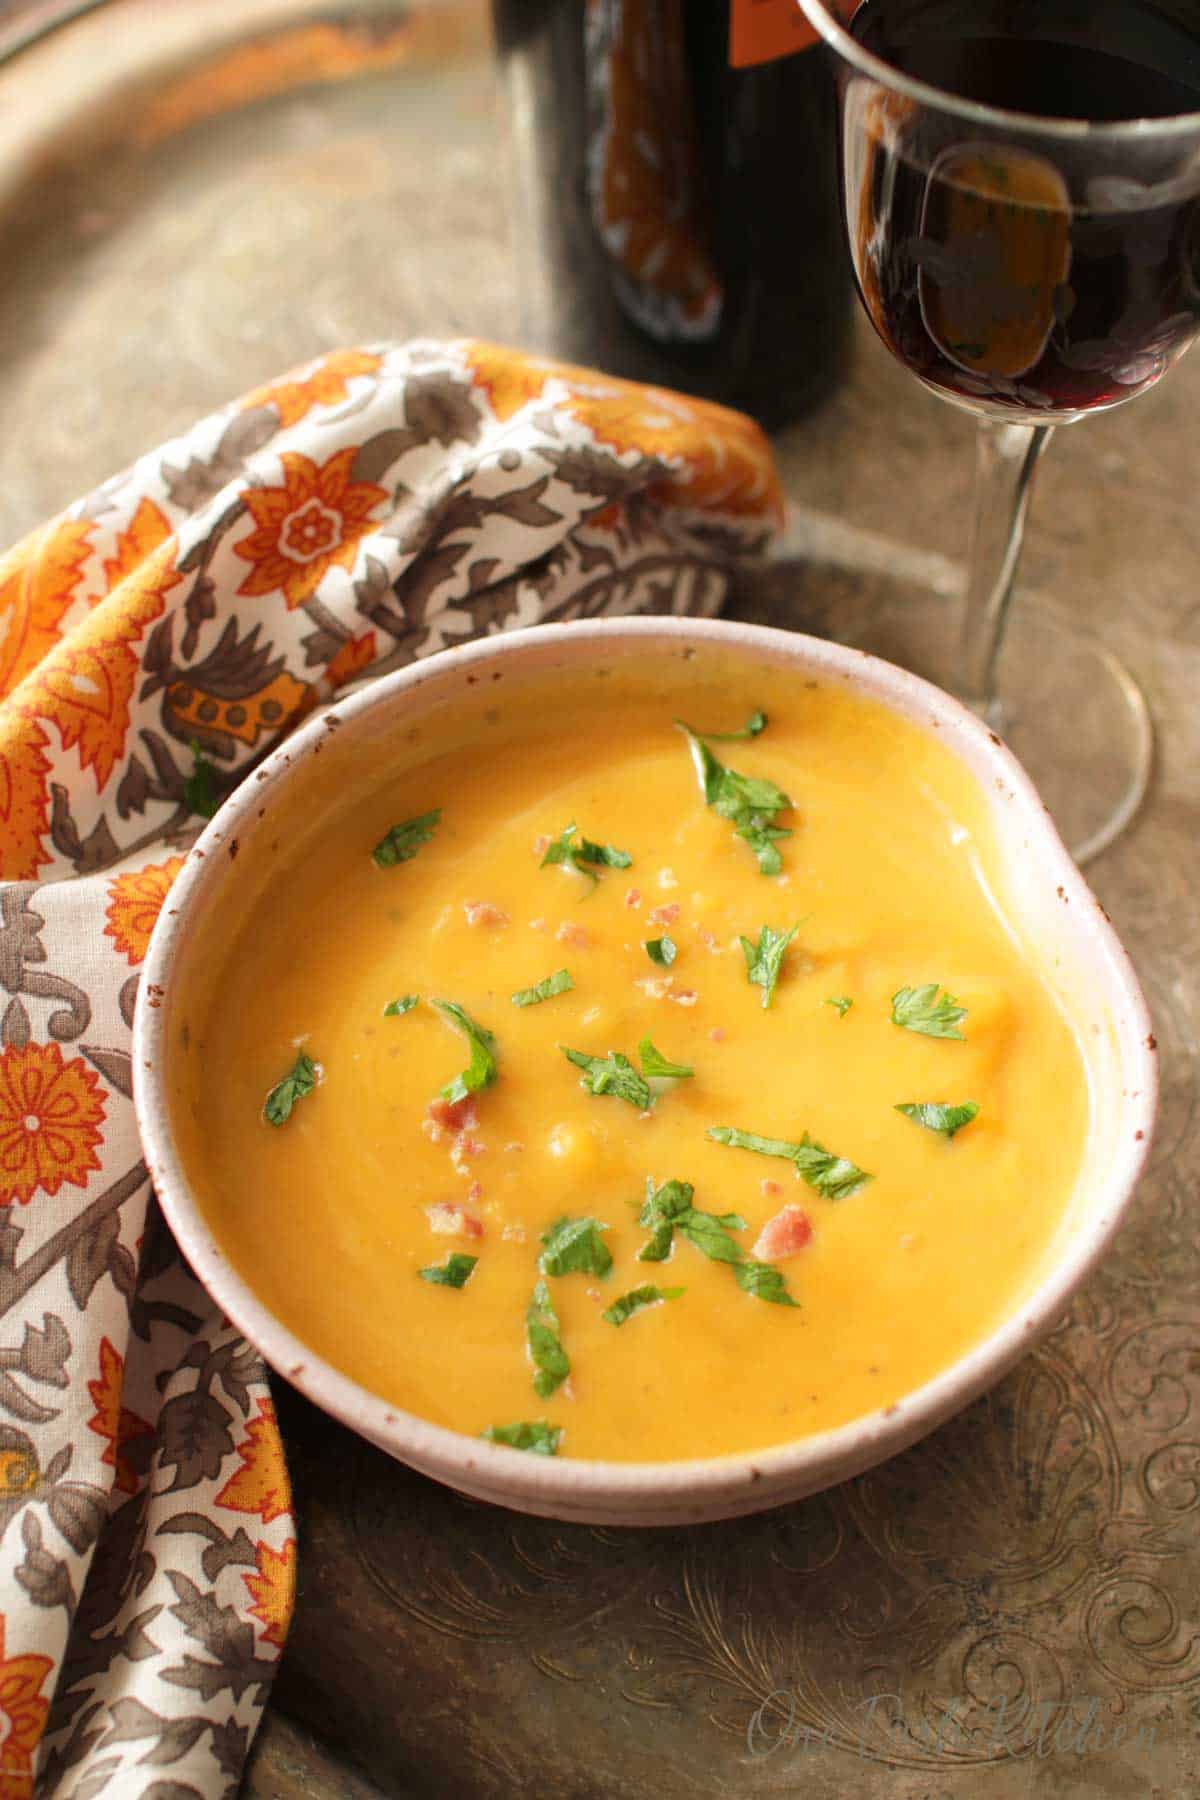 Butternut Squash Soup in a bowl next to a glass of red wine and an orange and grey cloth napkin all on a metal tray.